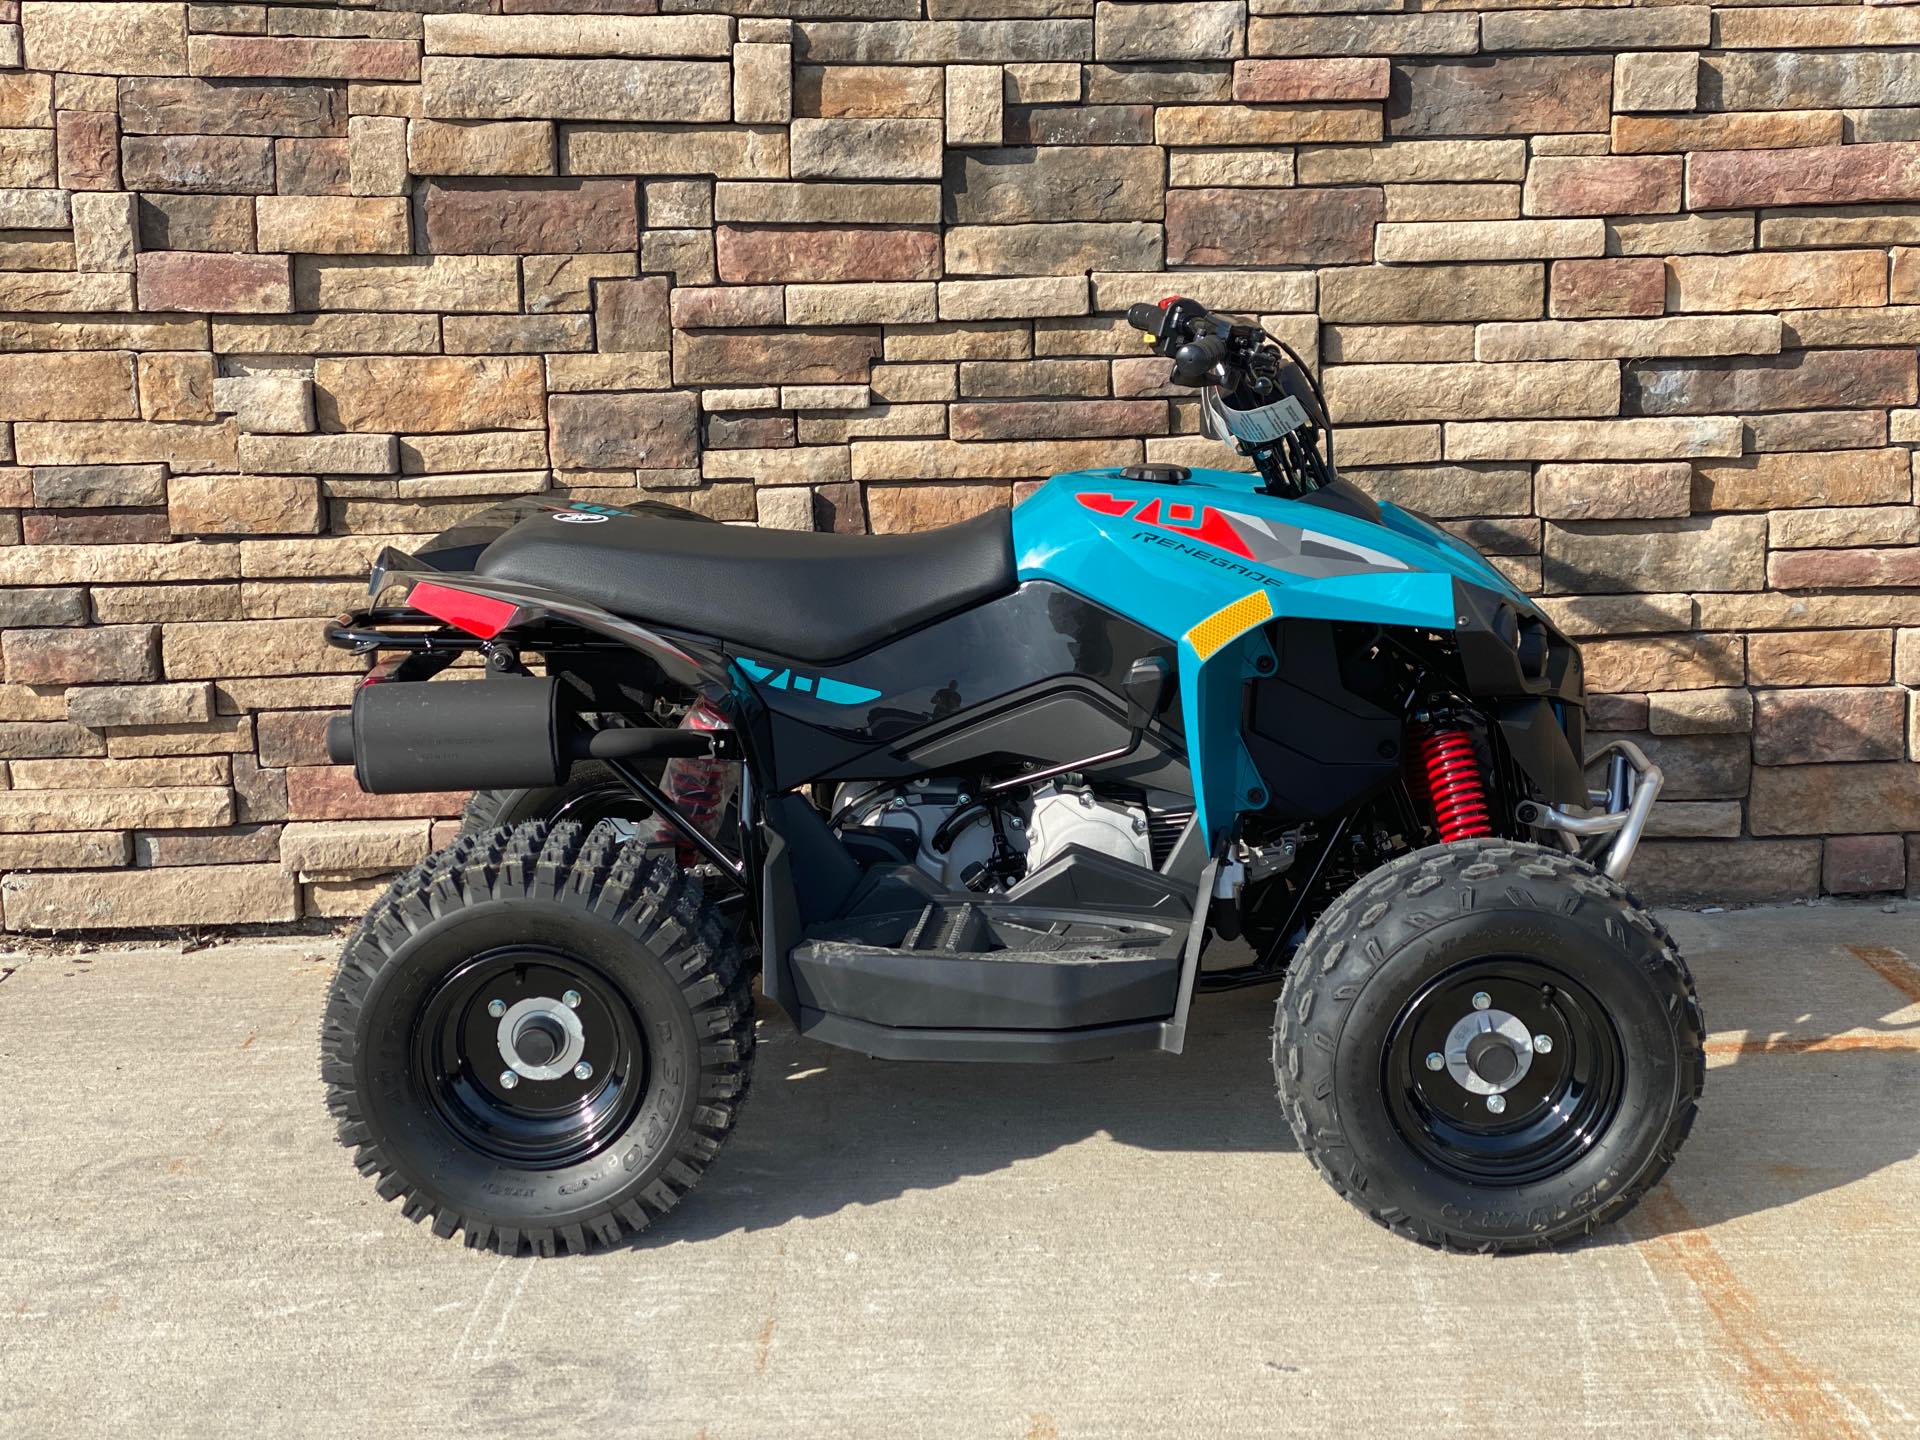 2022 Can-Am Renegade 70 EFI at Head Indian Motorcycle